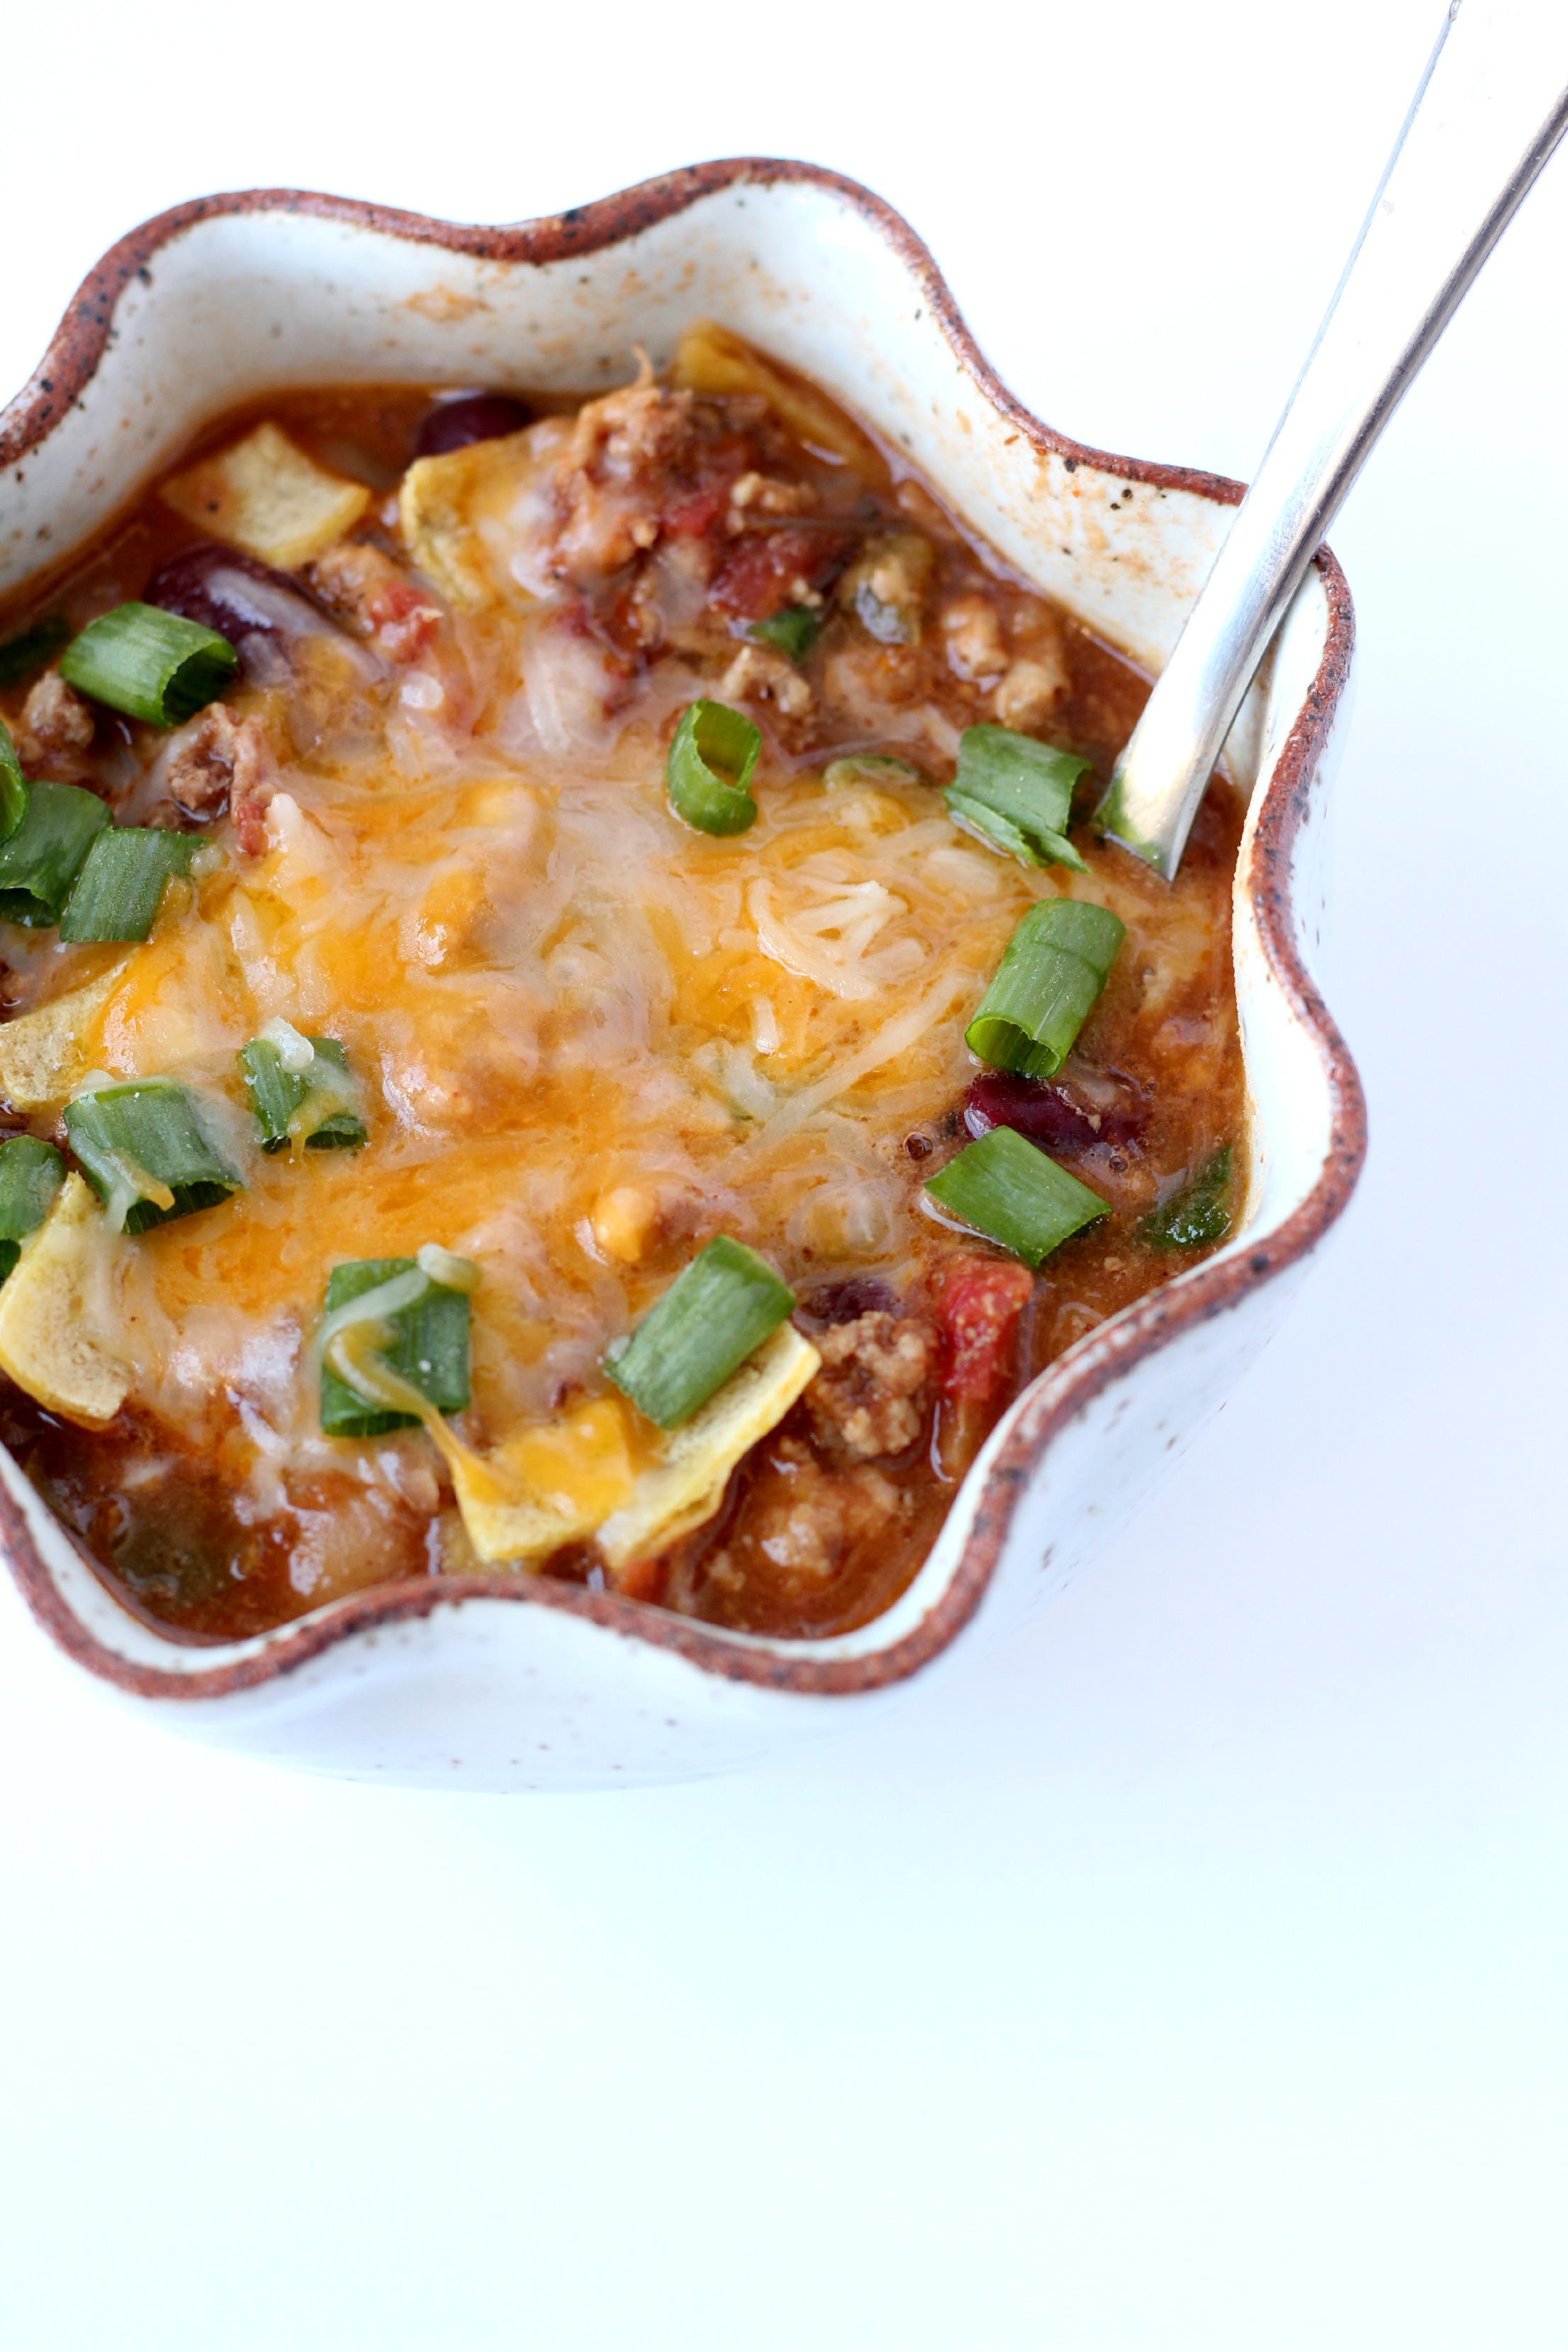 This Crockpot Two Bean Two Chili recipe is so simple but so satisfying! Perfect for a cold winter day.